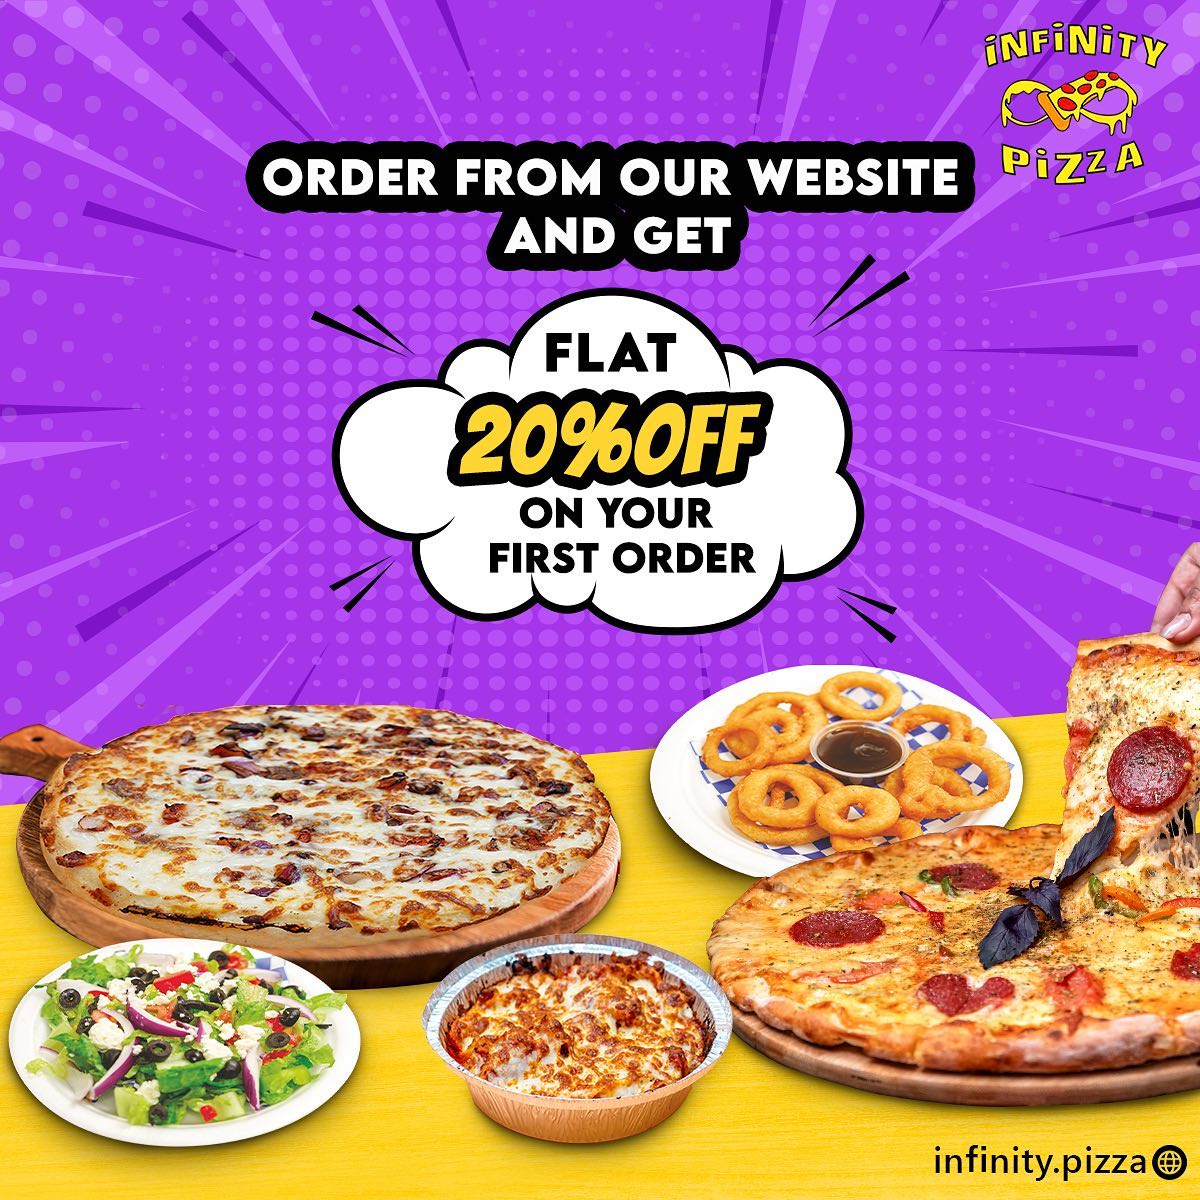 Order Your Crispy Crust Pizza in Calgary - Fast Delivery!